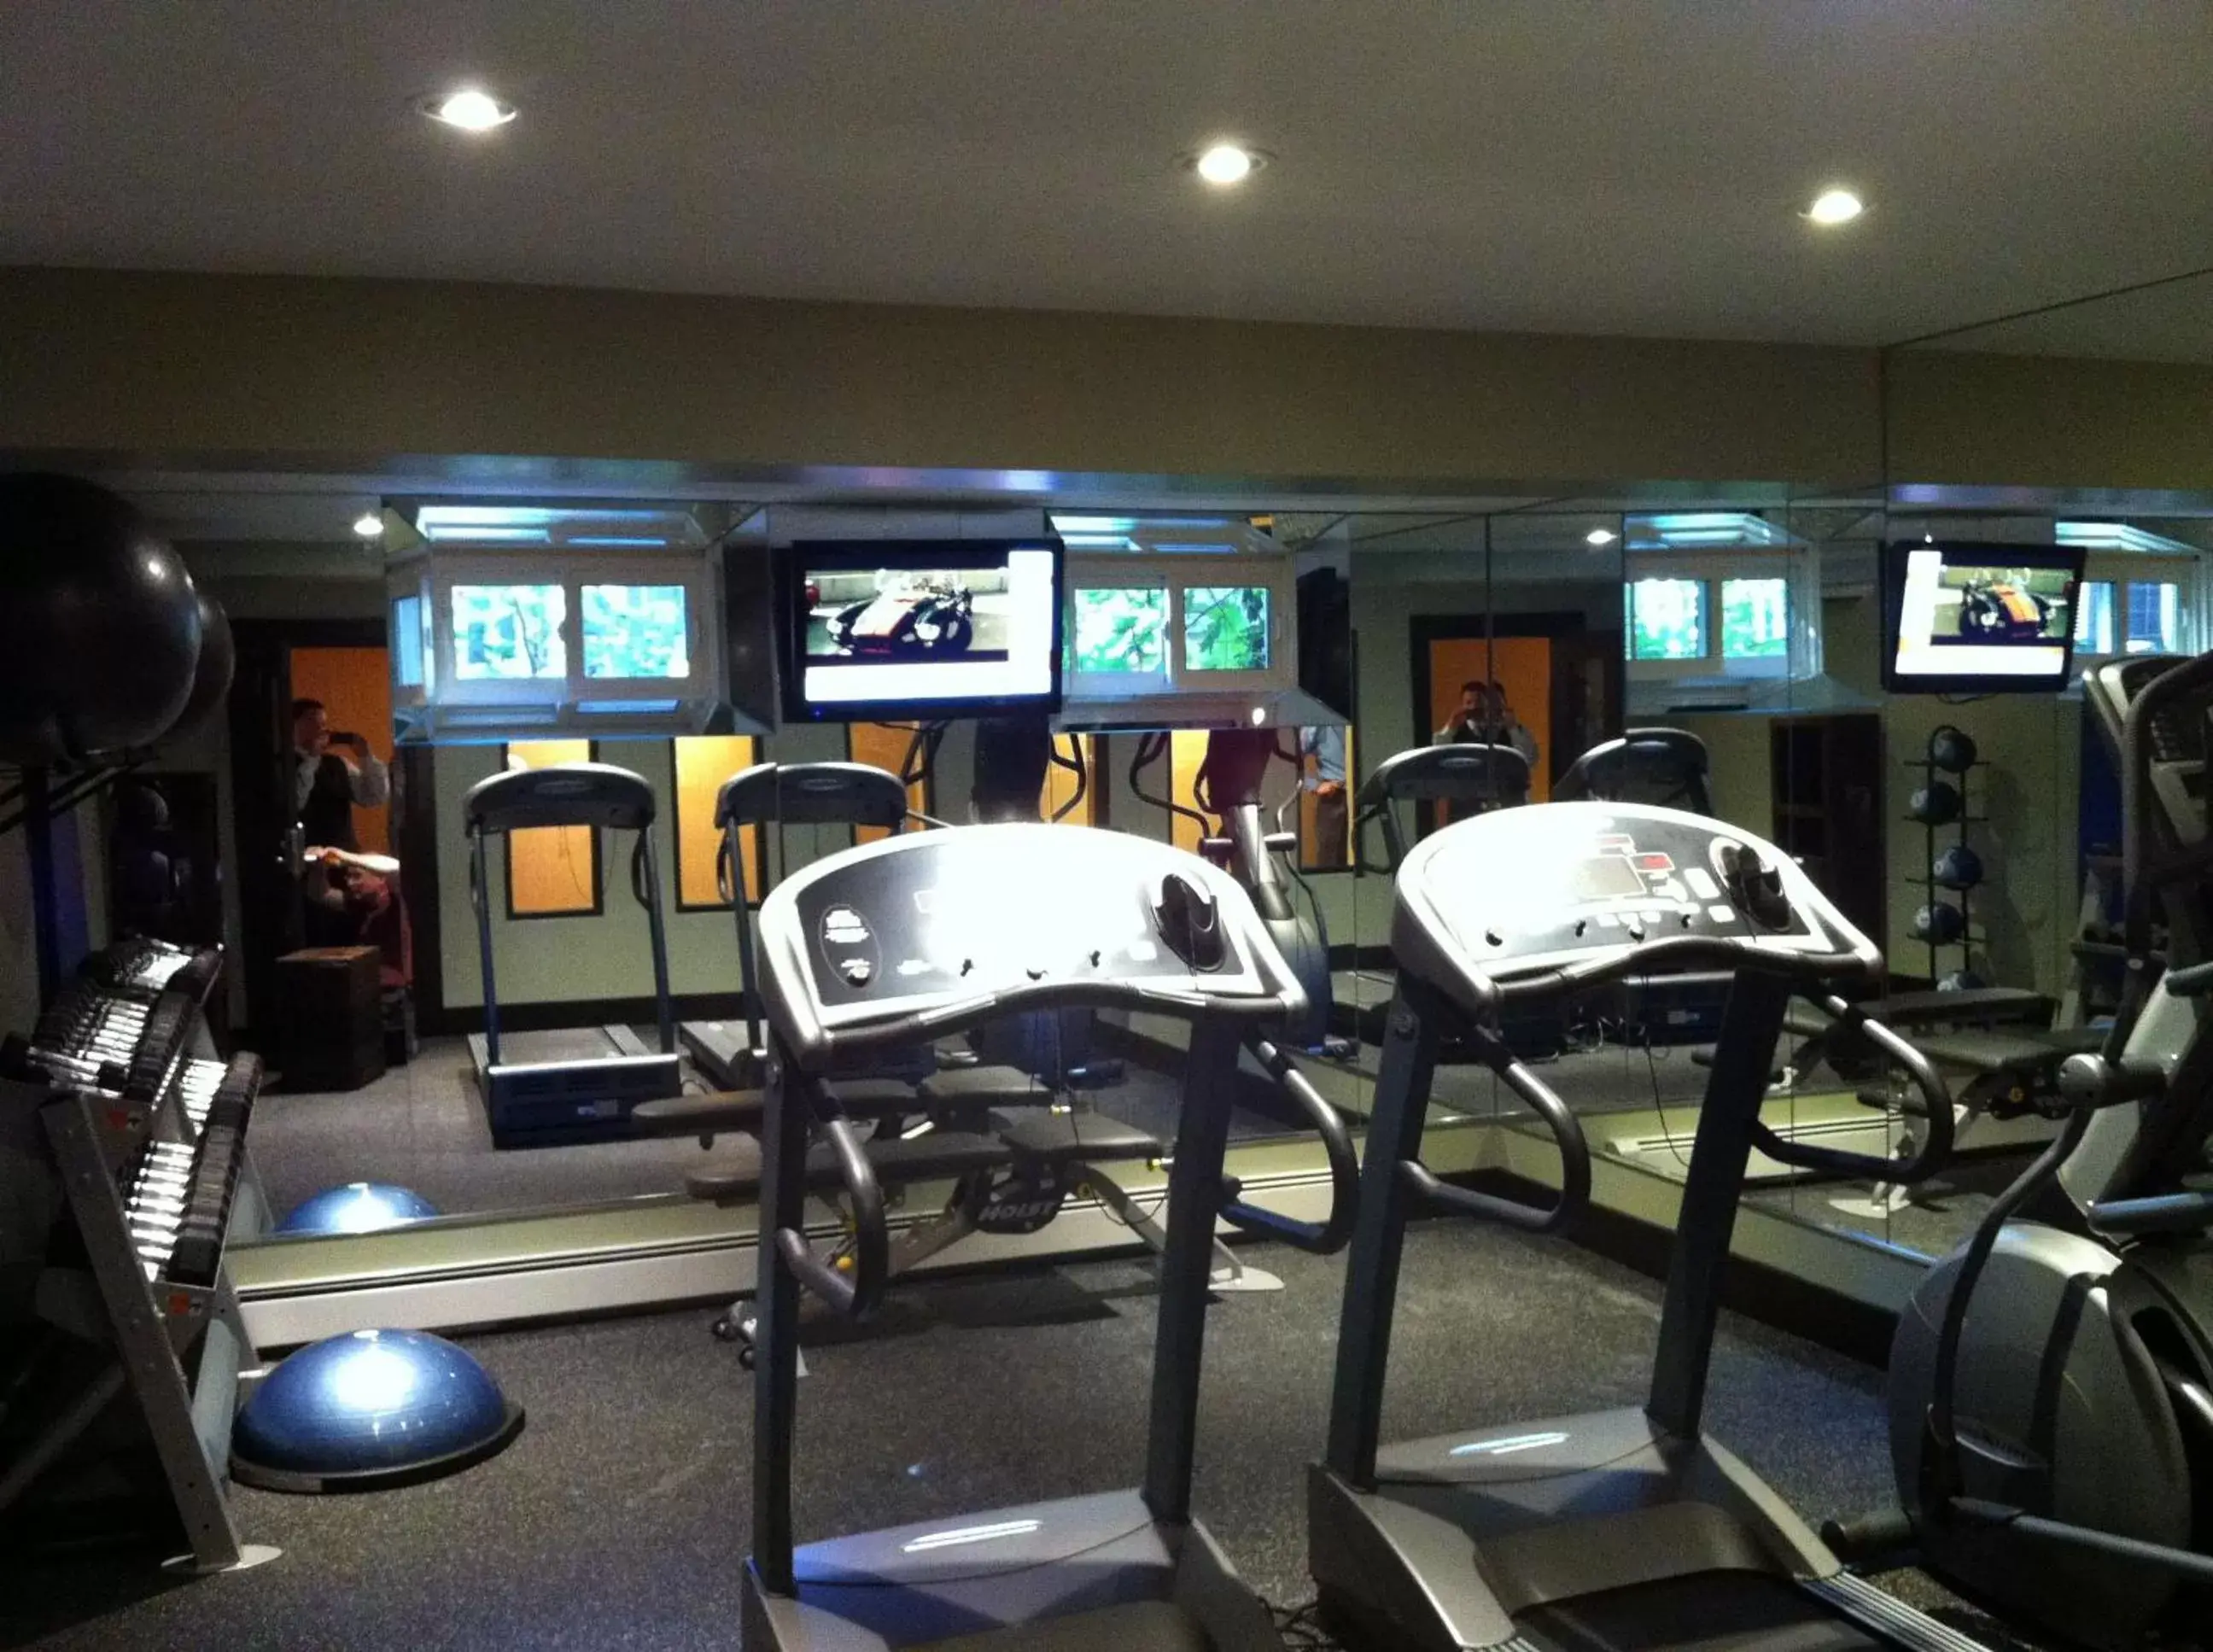 Fitness centre/facilities, Fitness Center/Facilities in The Hotel on Pownal